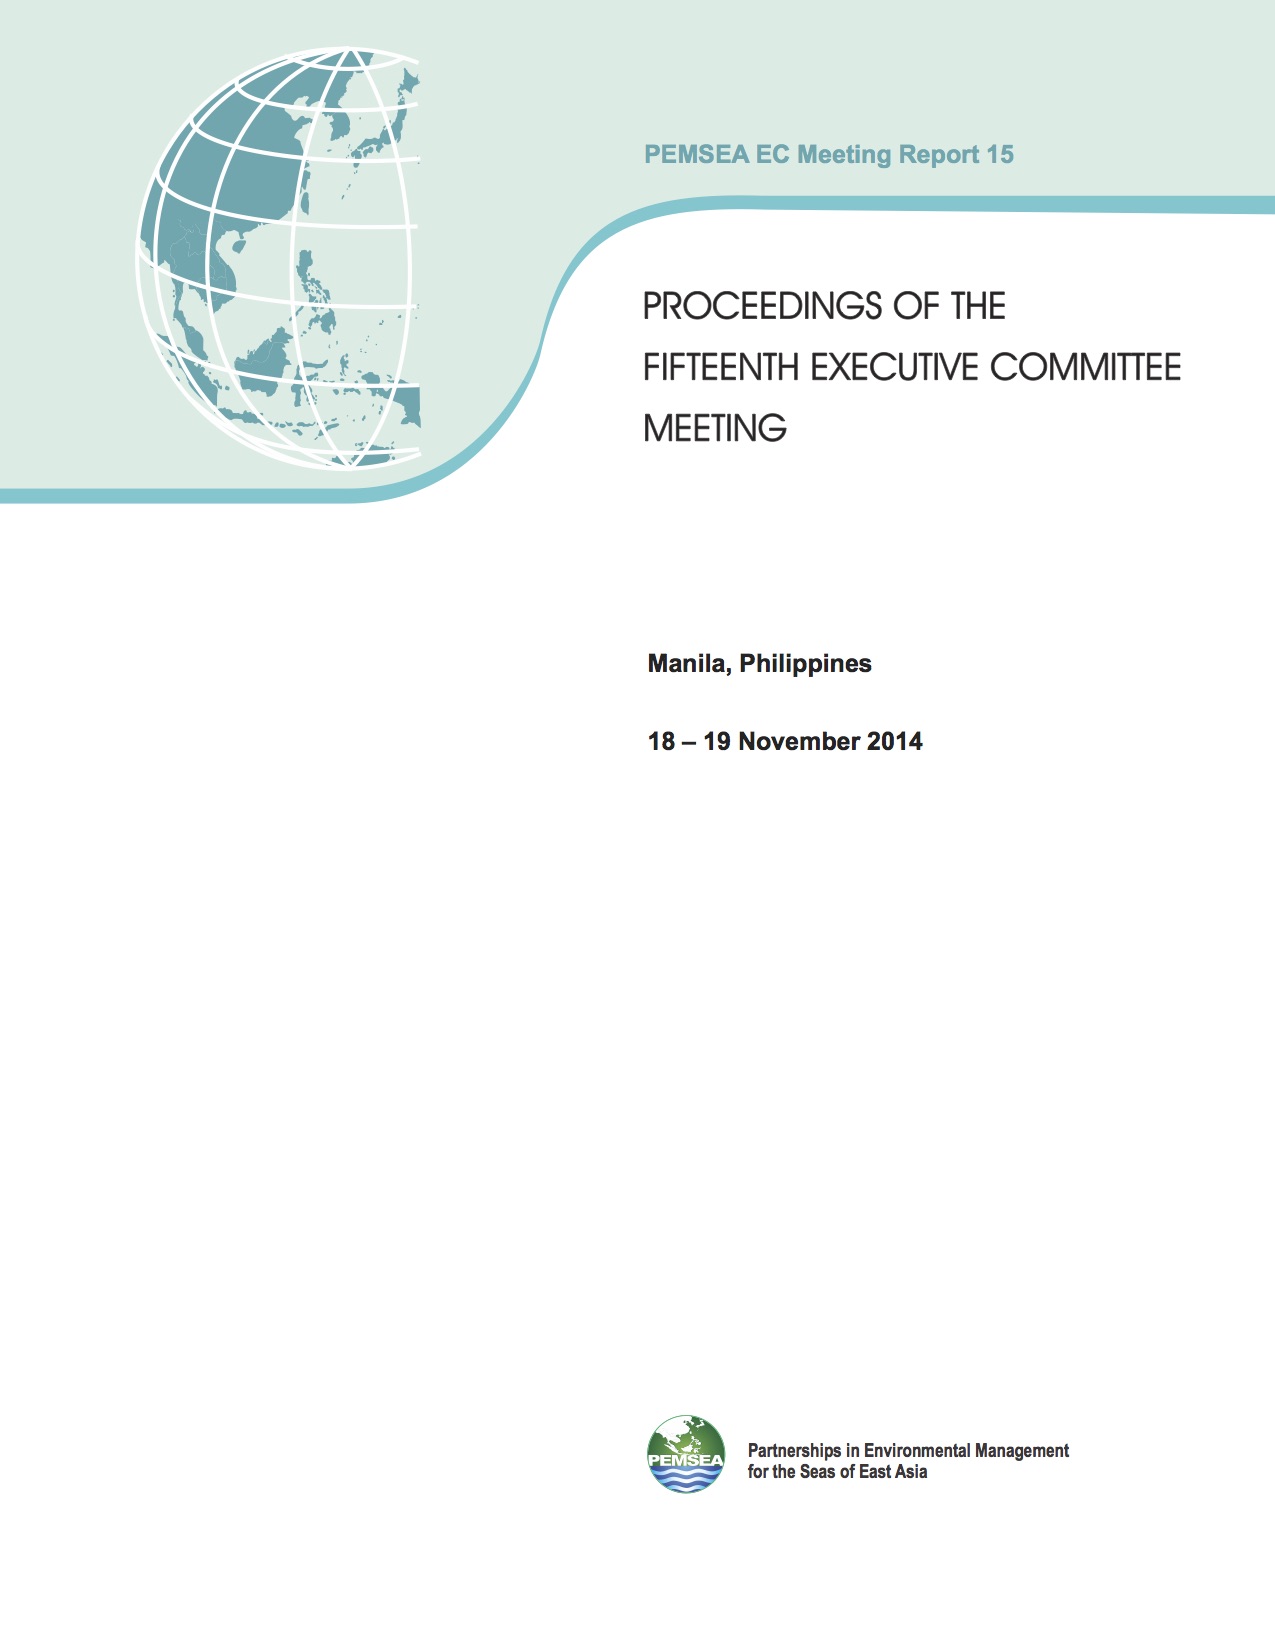 Proceedings of the Fifteenth Executive Committee Meeting